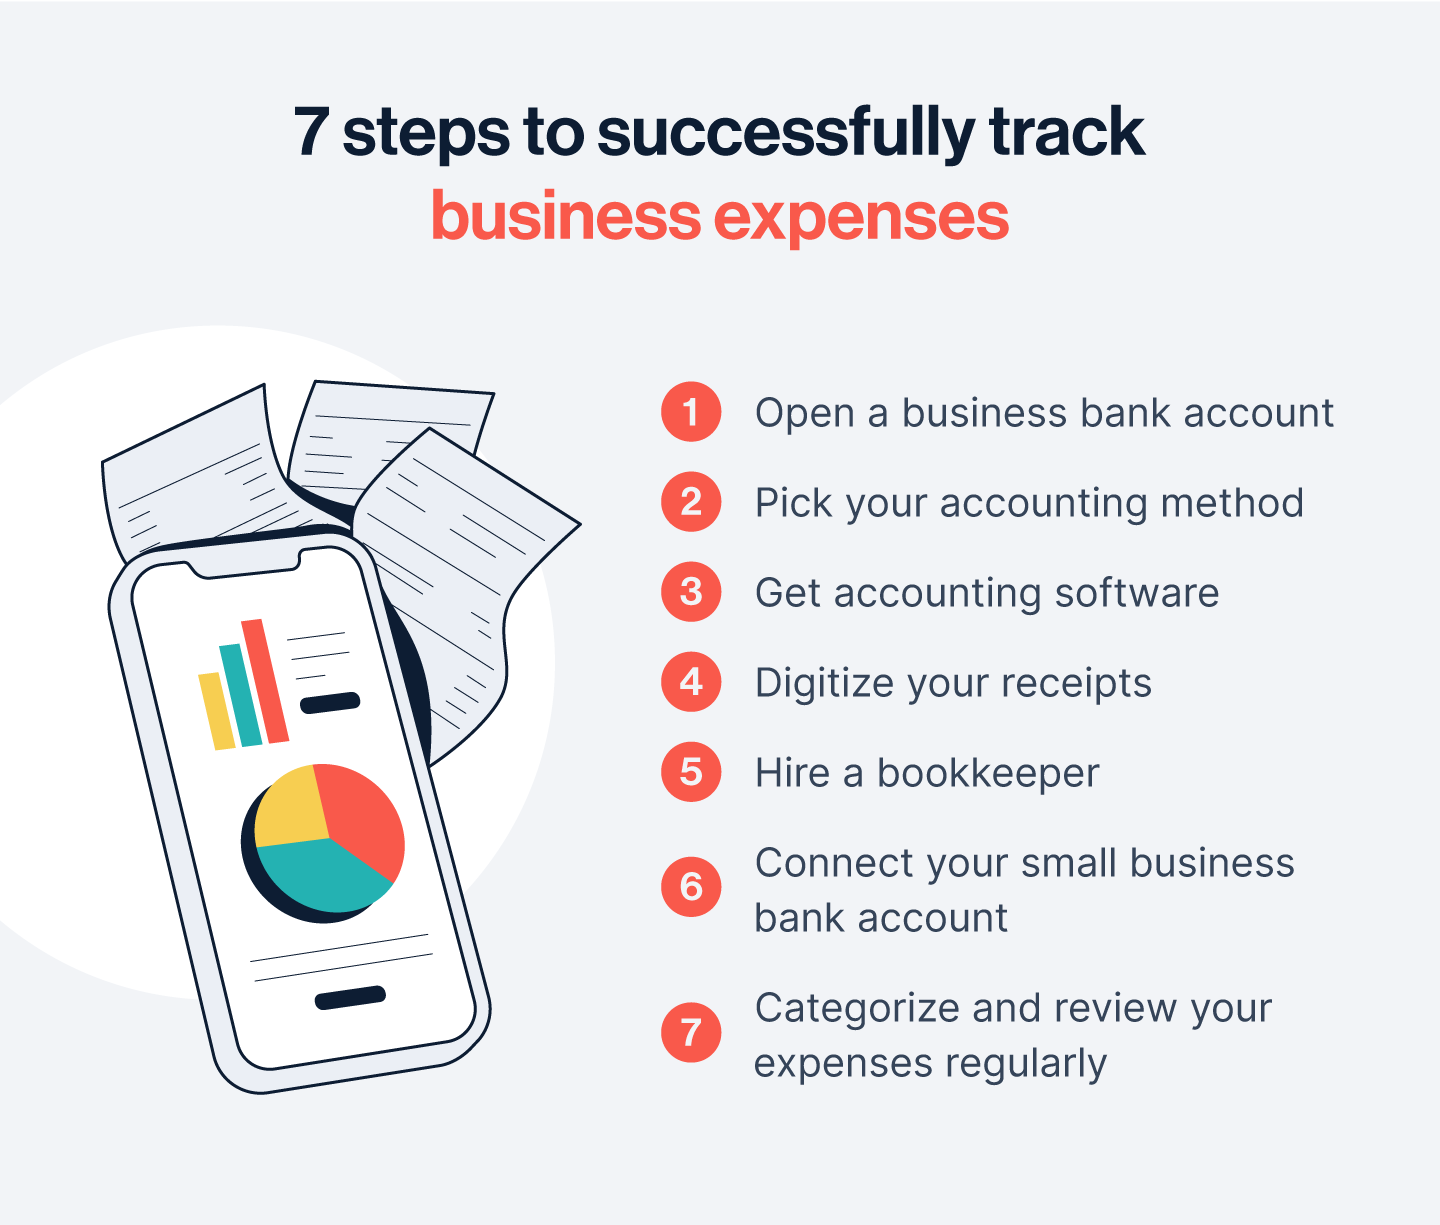 steps-to-track-business-expenses.png